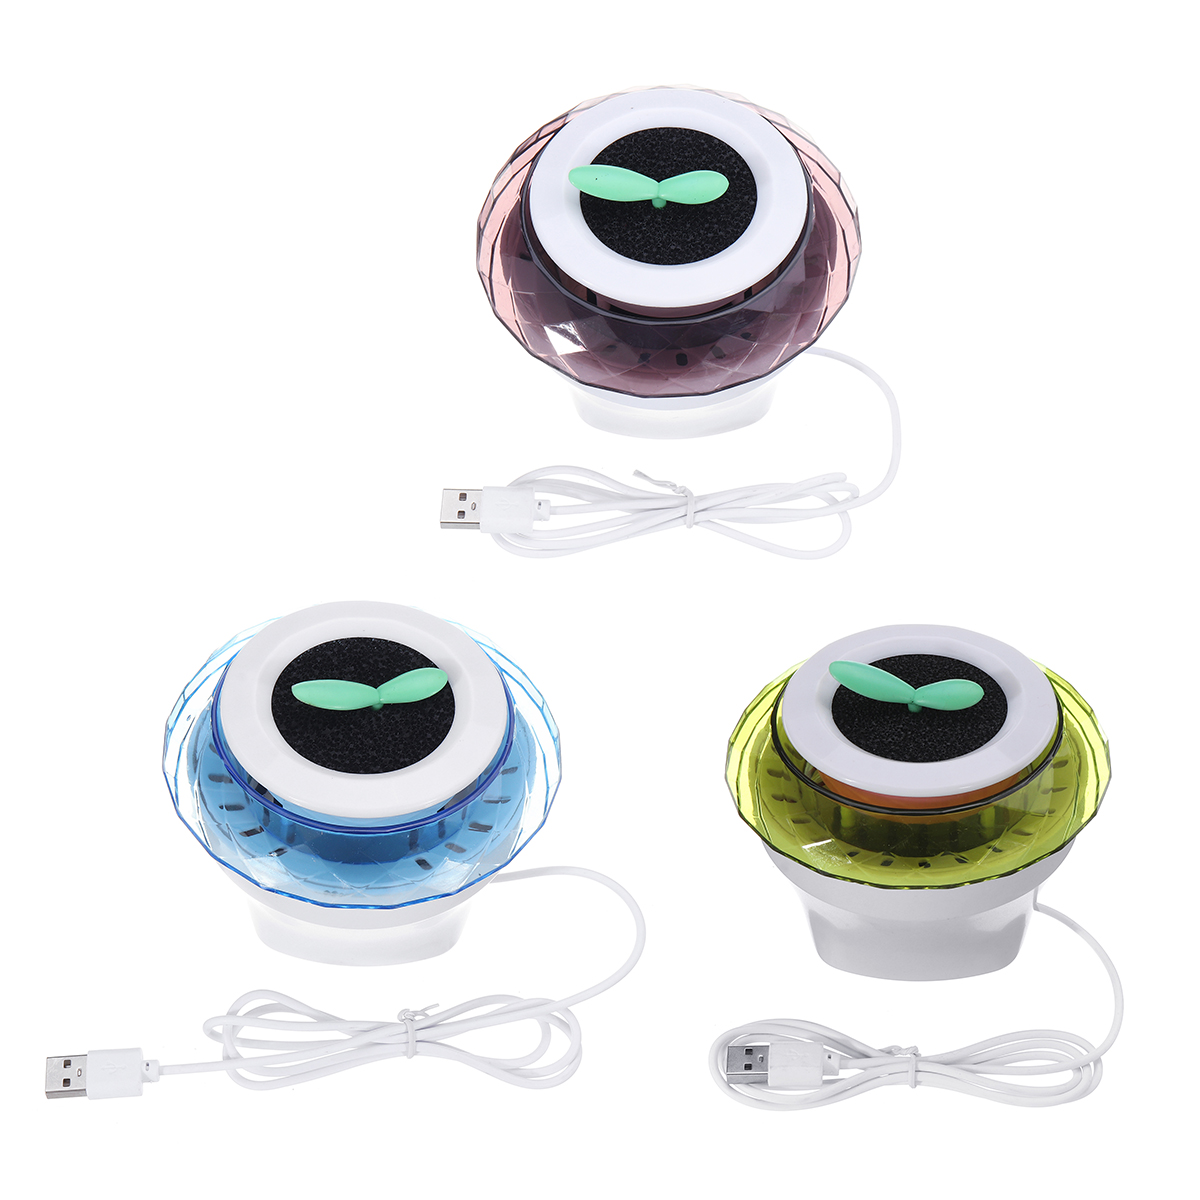 Mini-USB-Car-Air-Purifier-Portable-Auto-Multi-functional-Fresheners-Oxygen-Remove-Cleaners-Freshers--1575383-10